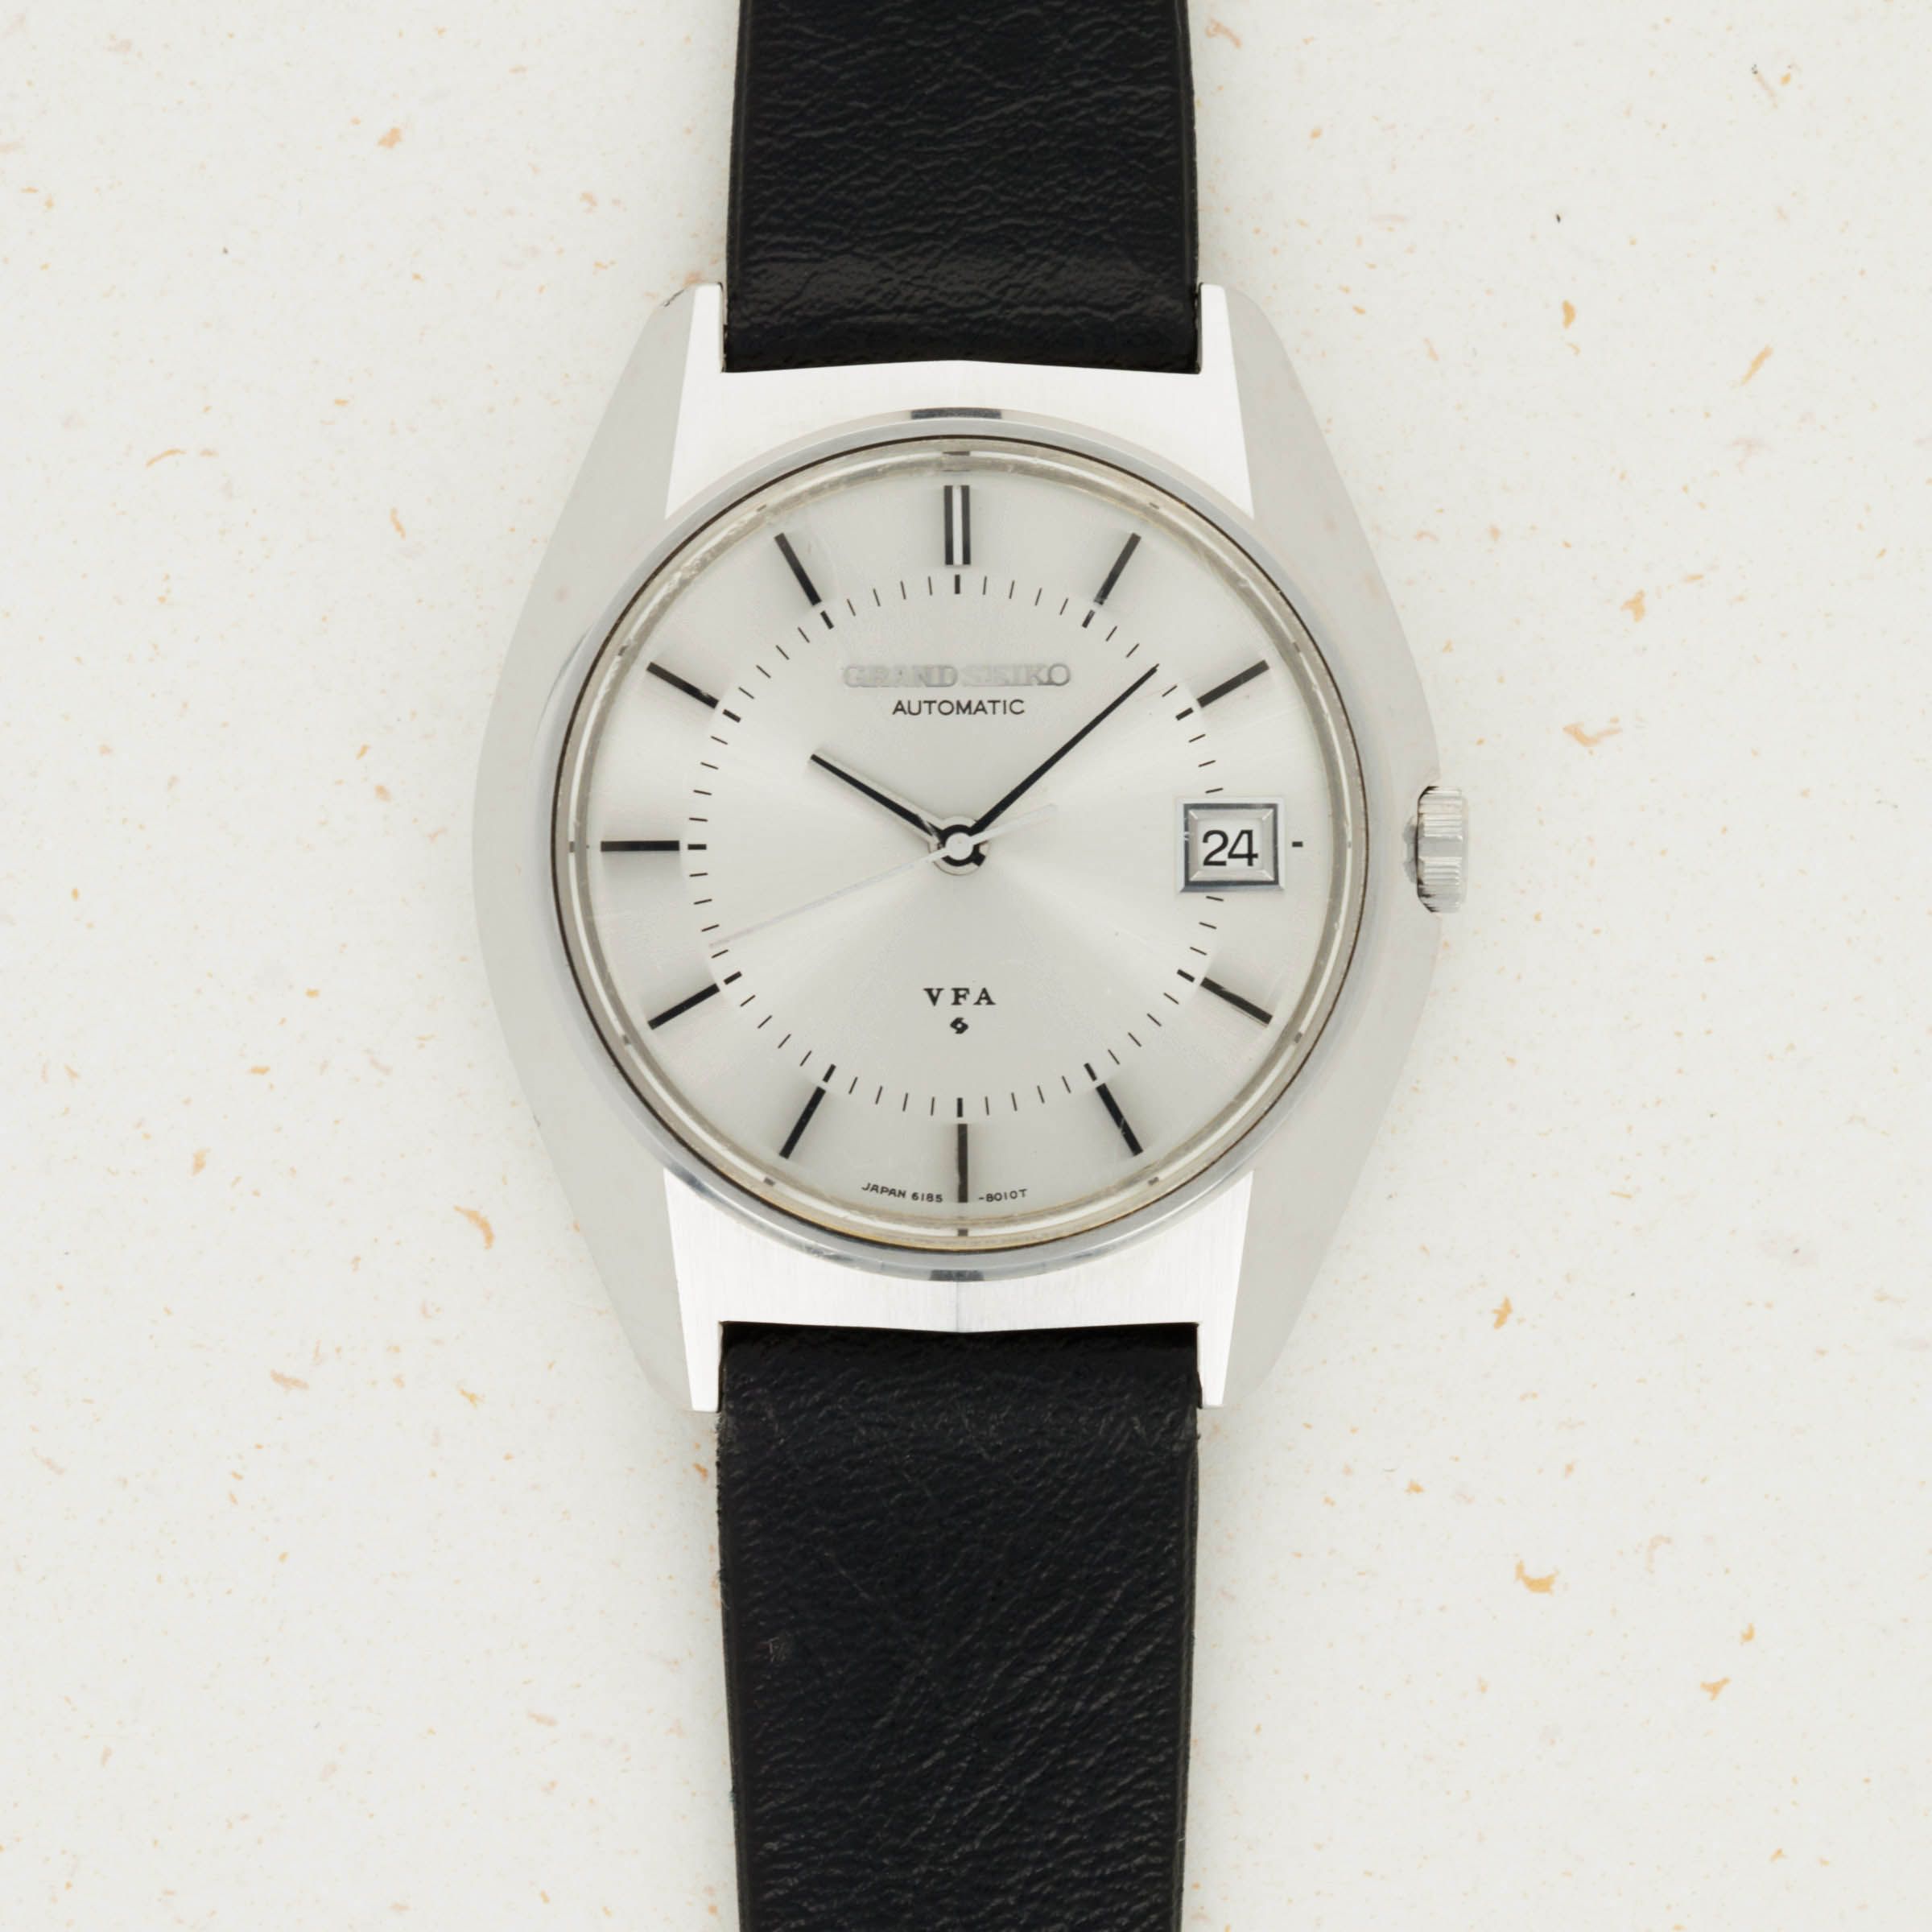 Grand Seiko VFA 6185-8021 | Auctions | Loupe This